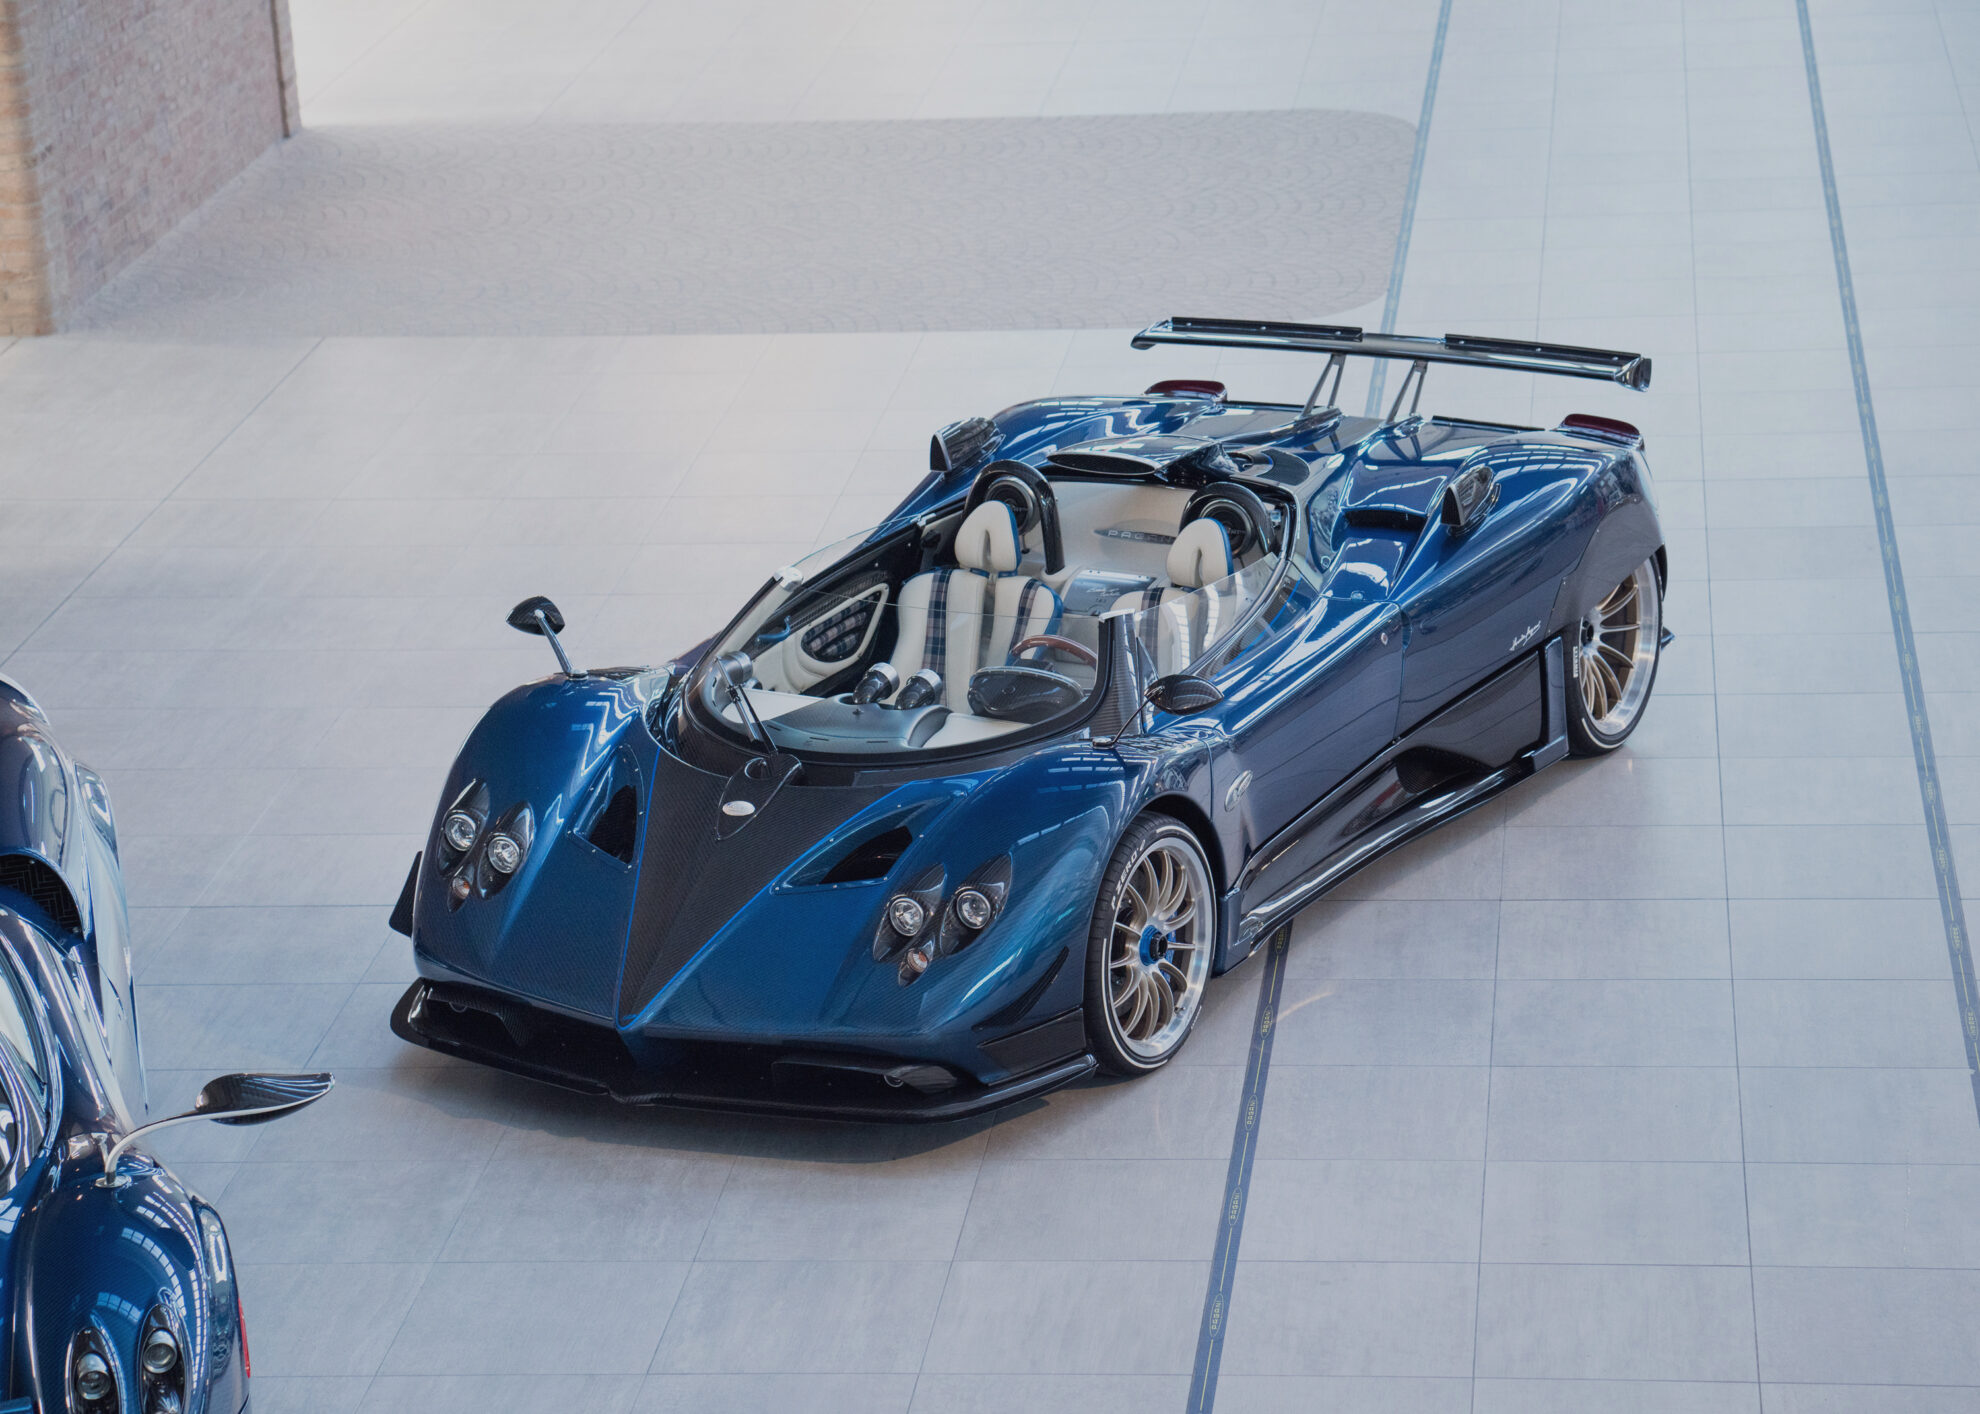 Pagani: we will always build special one-off projects